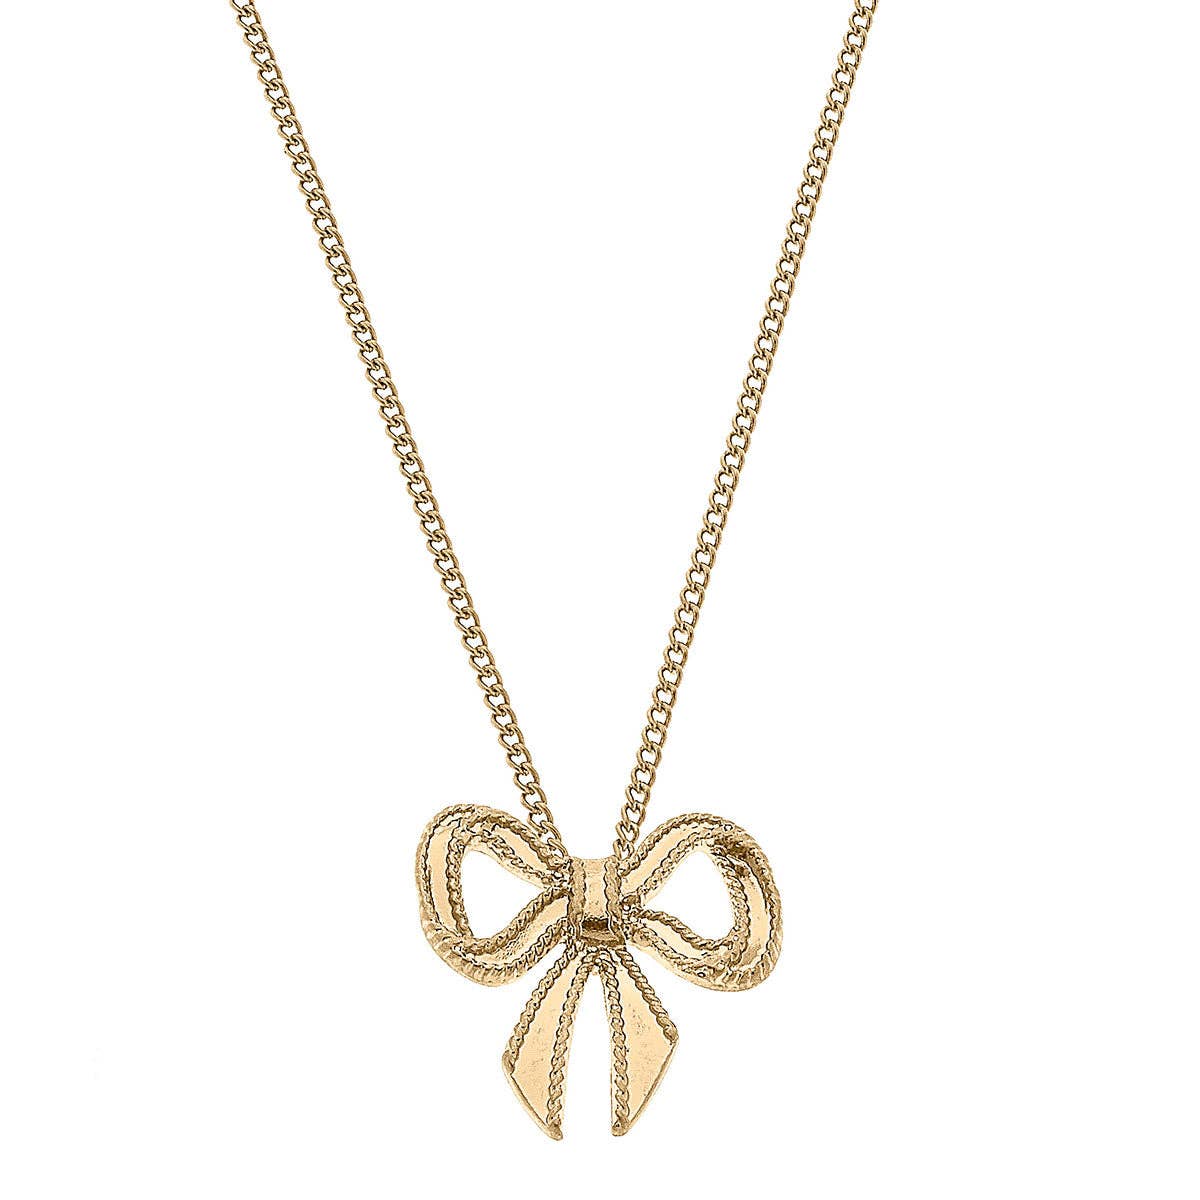 CANVAS Style - Dominique Bow Pendant Necklace in Worn Gold